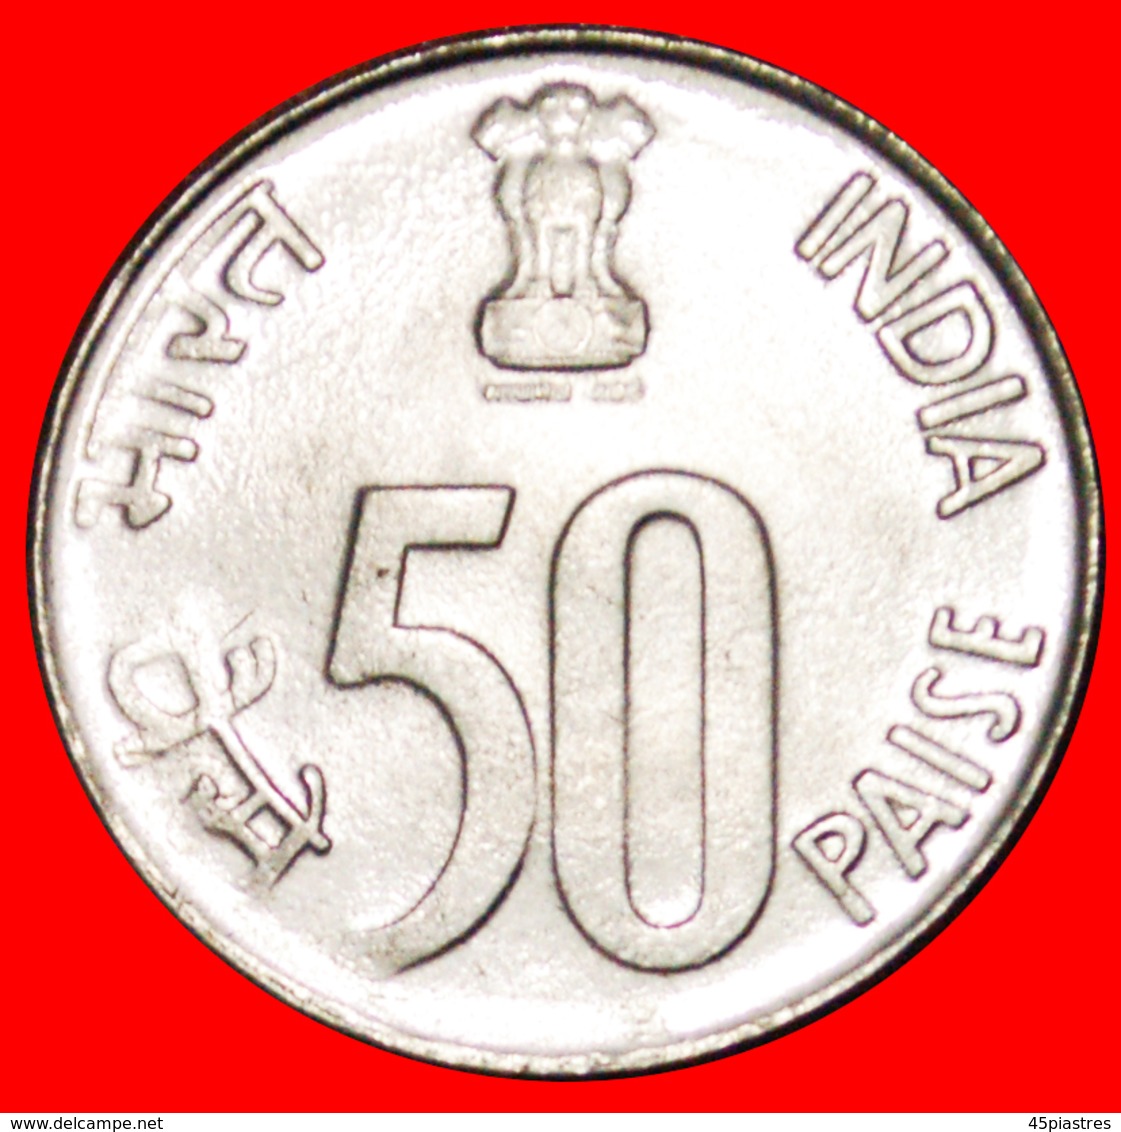 √ MAP: INDIA ★ 50 PAISE 1999 NOIDA MINT LUSTER! LOW START ★ NO RESERVE! - Inde